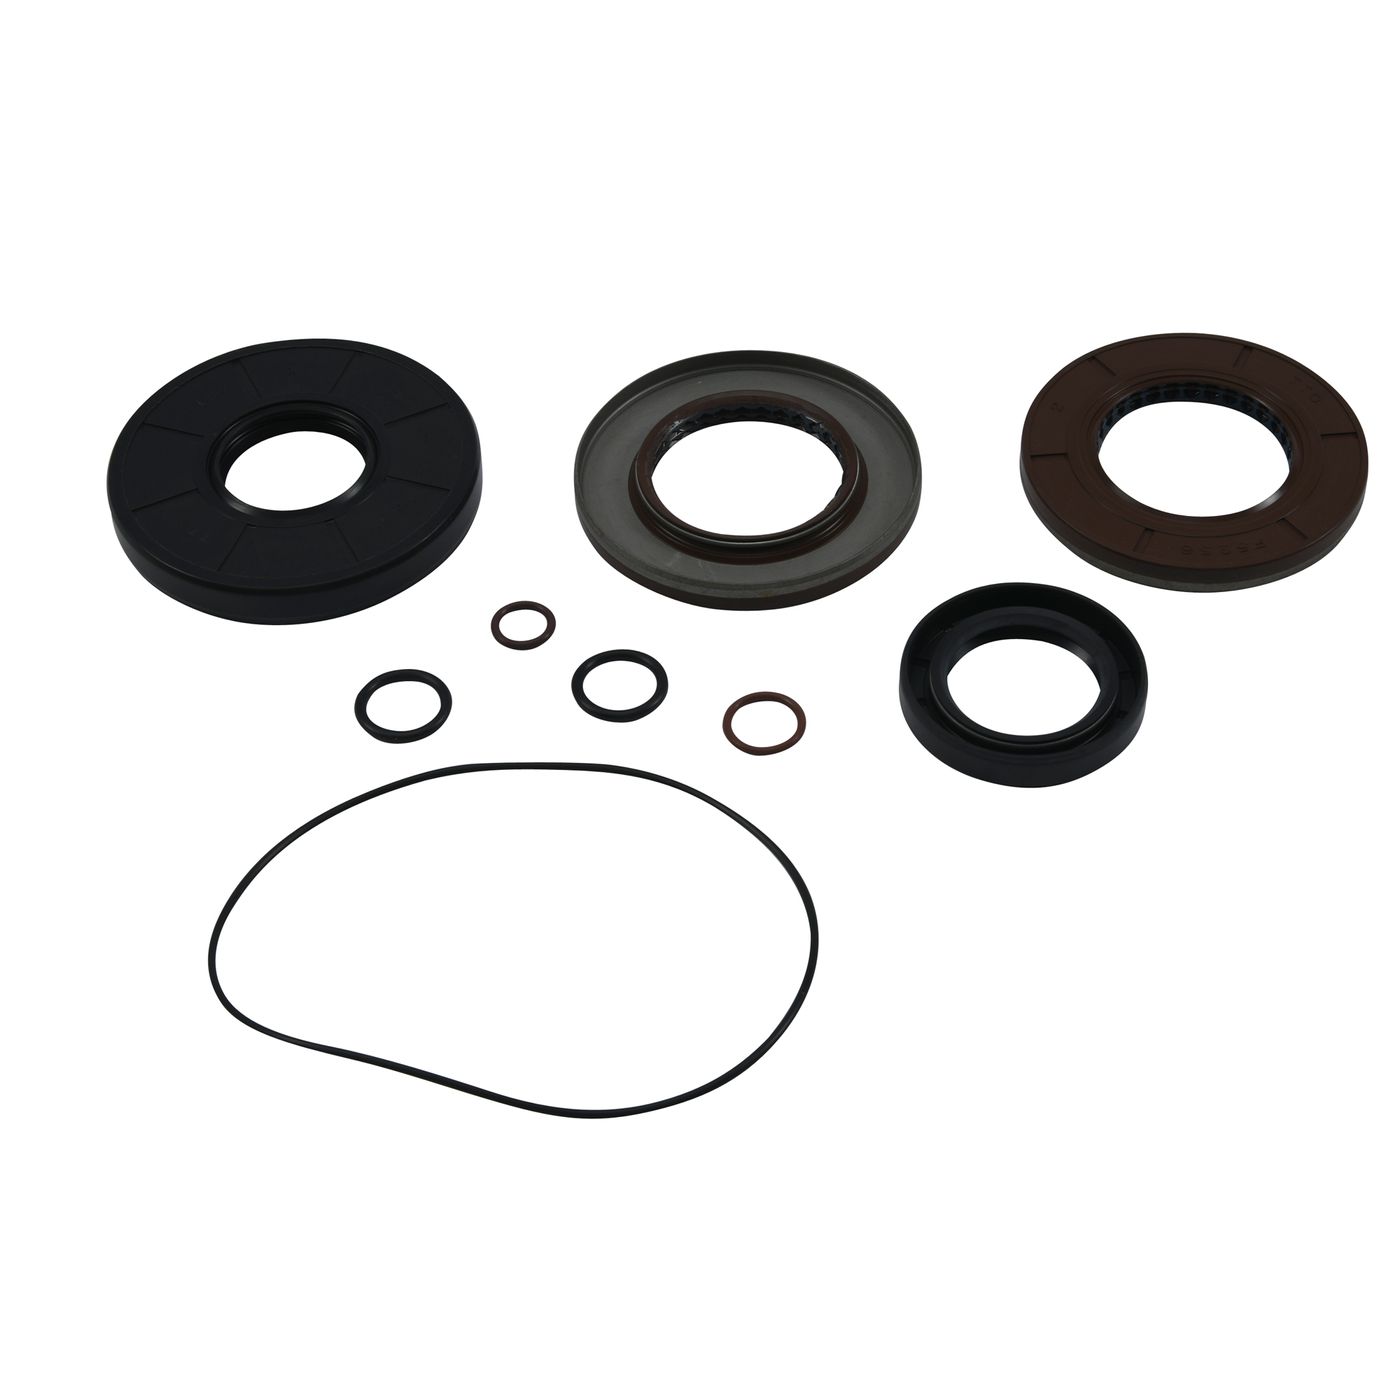 Wrp Diff Seal Kits - WRP252113-5 image